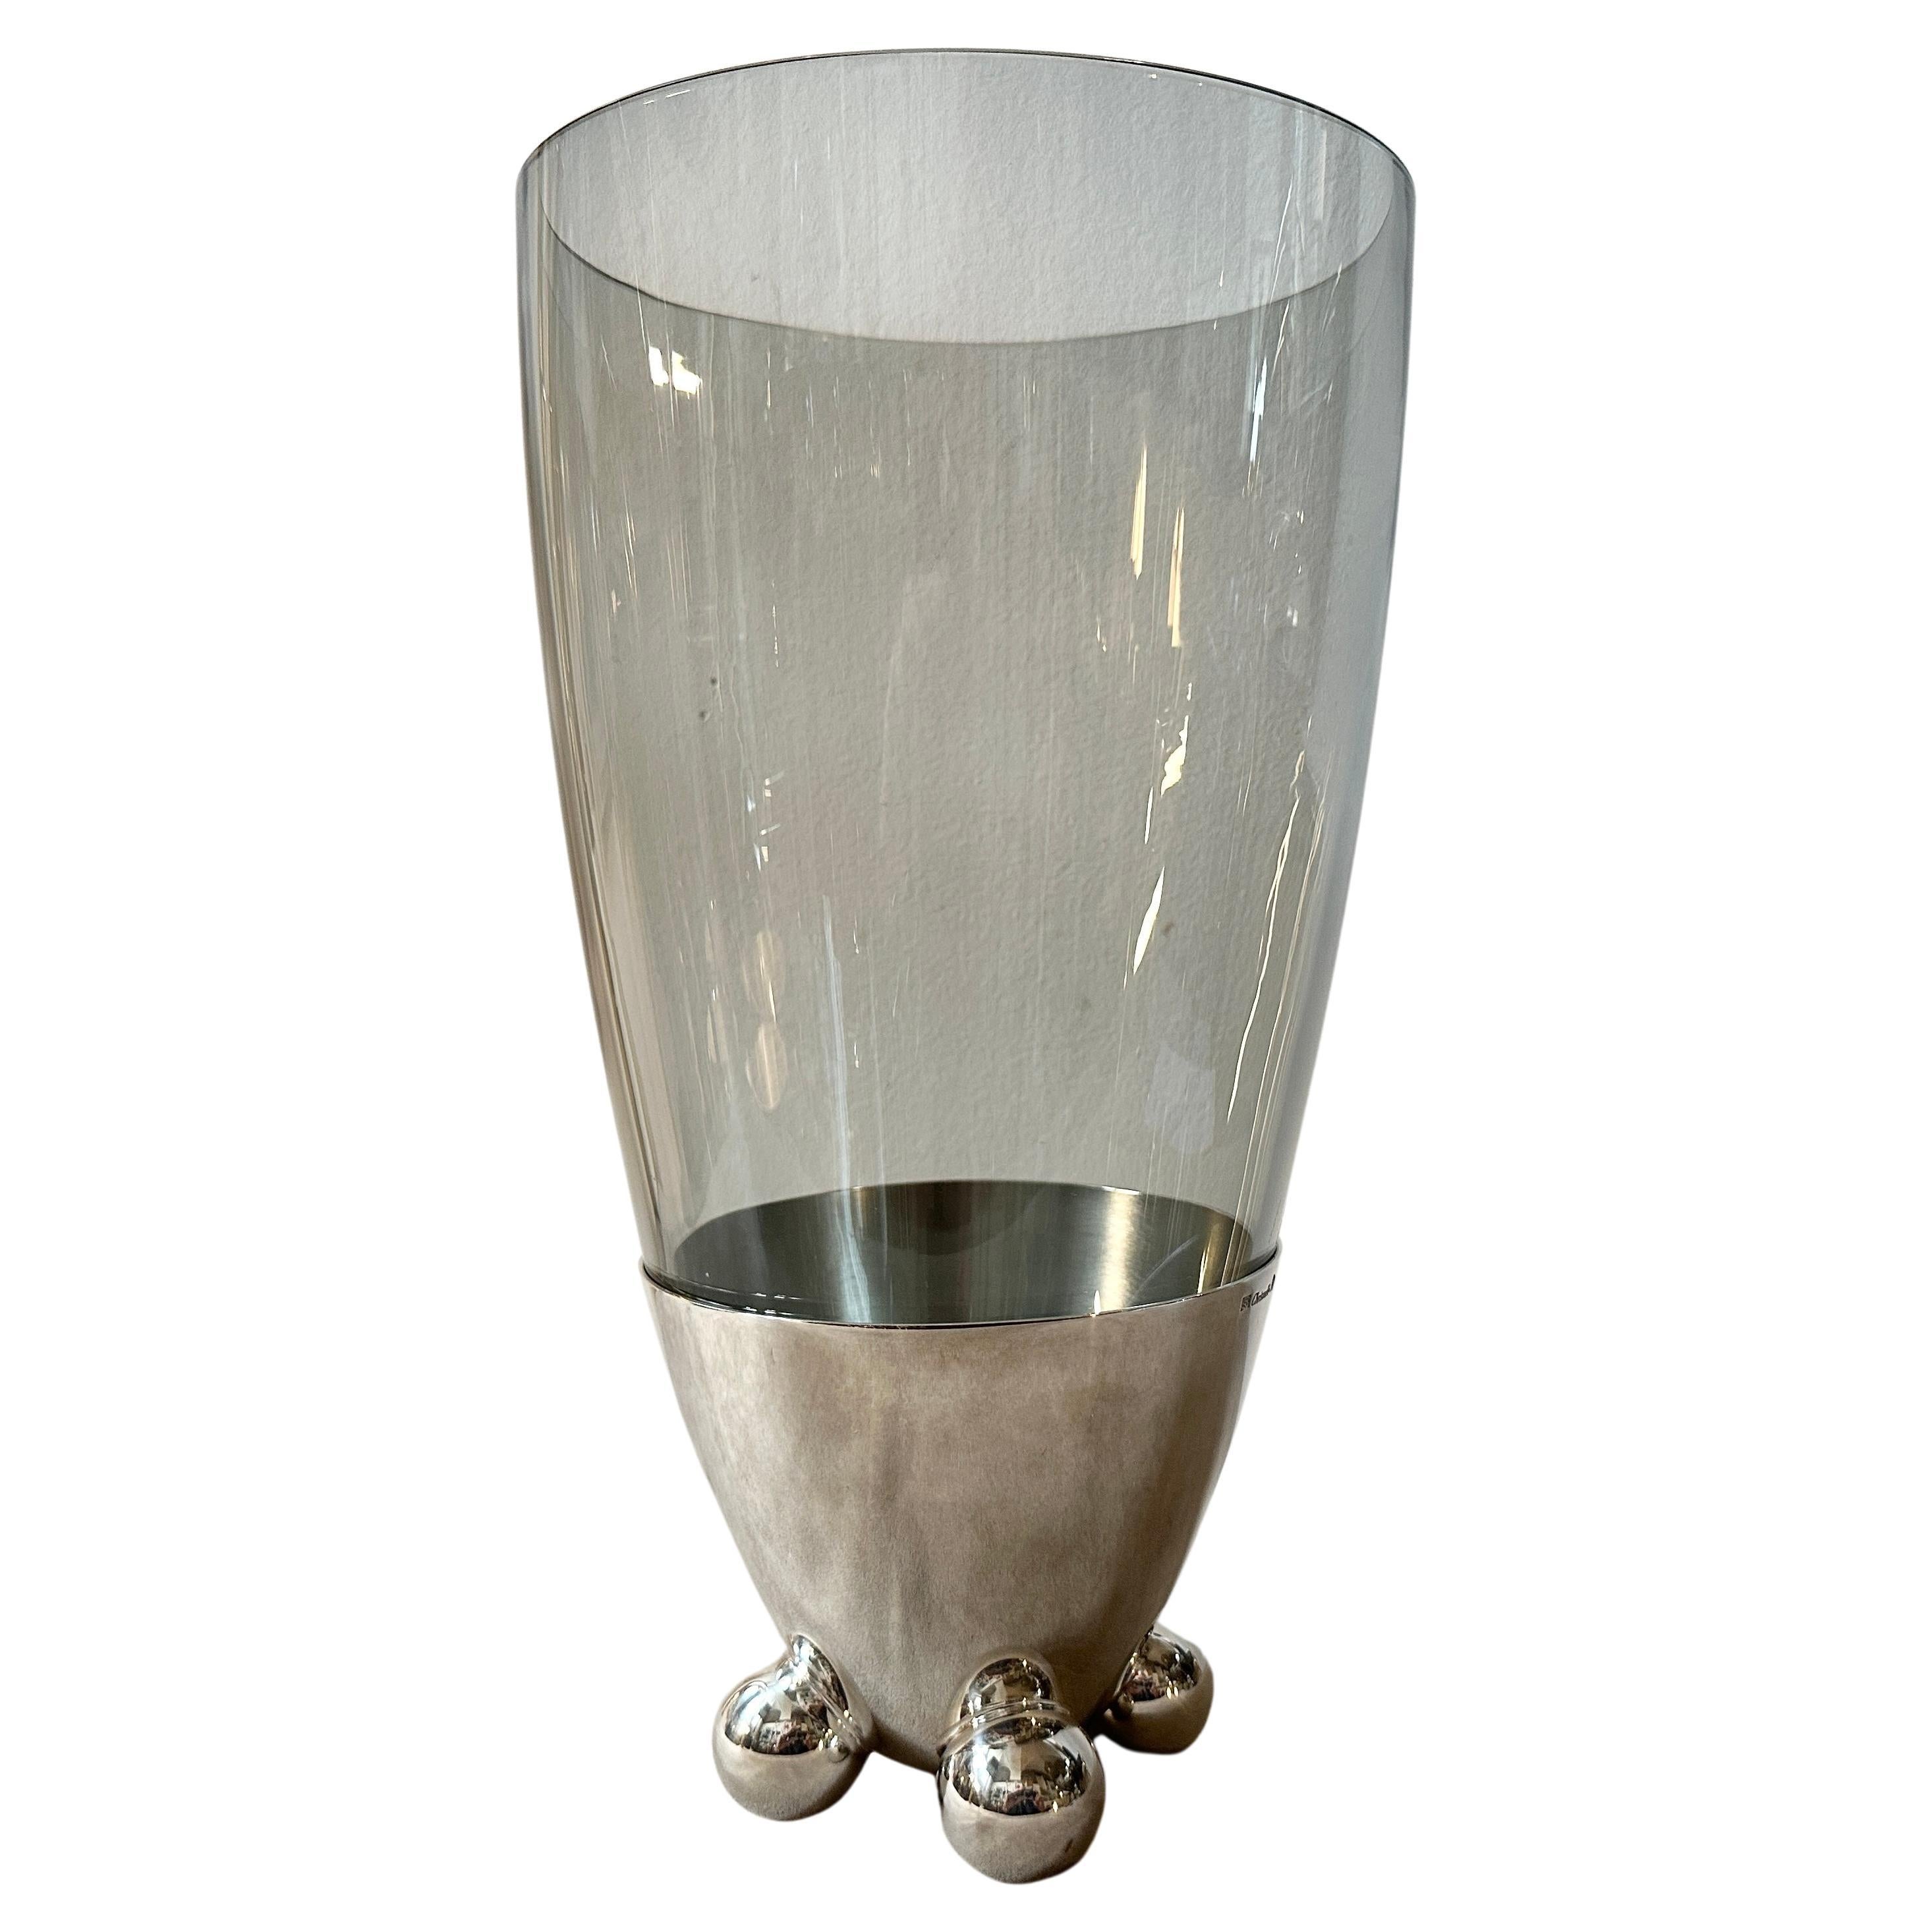 1990s Space Age Silver Plated Atomes Vase by Richard Hutten for Christofle For Sale